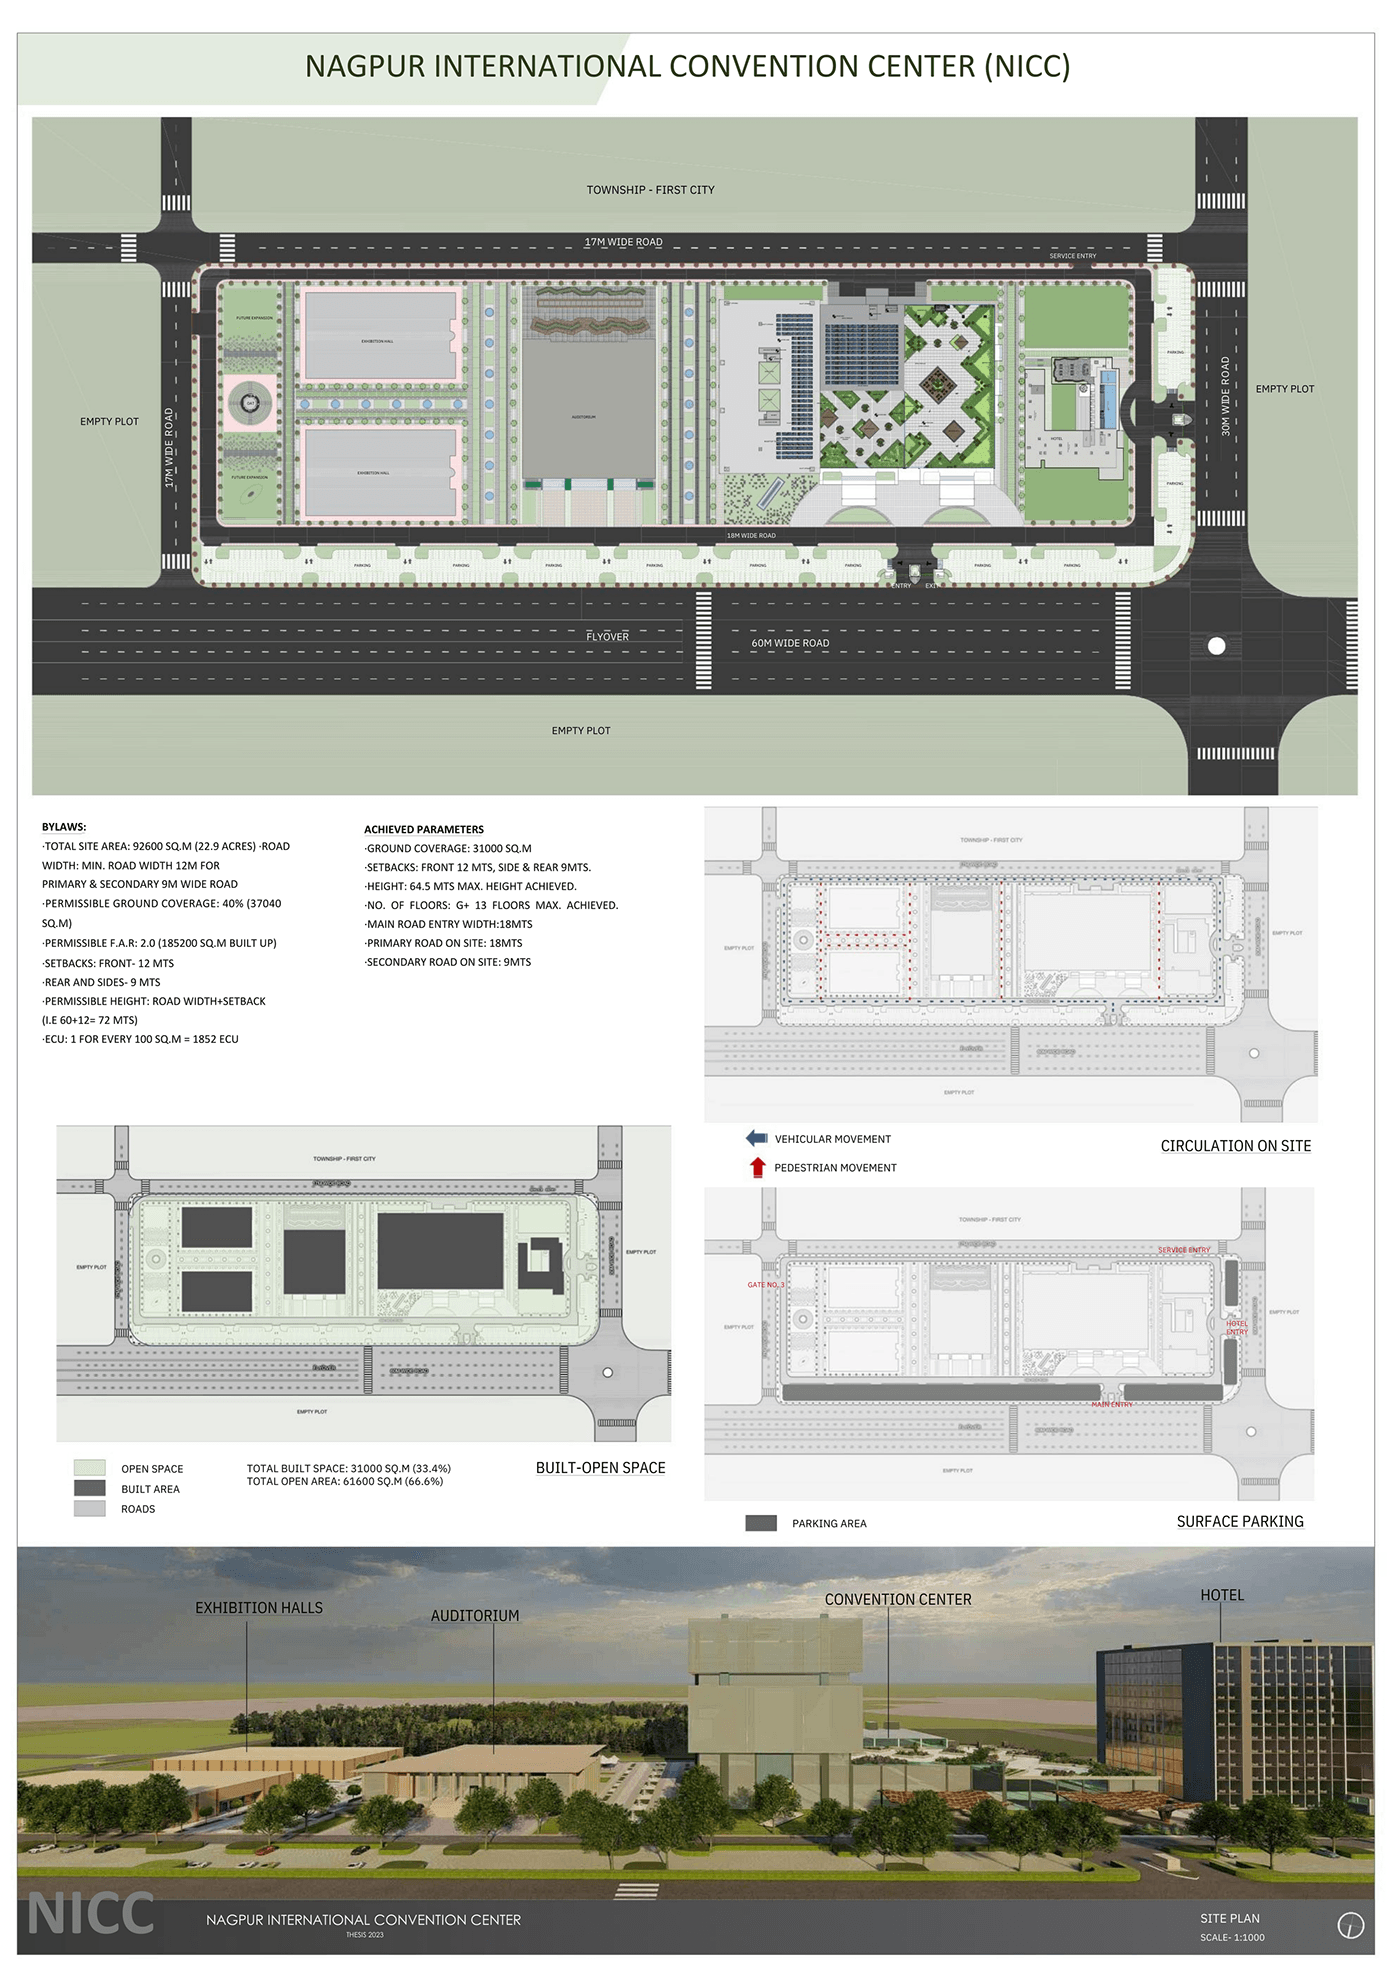 #architectural thesis #convention center THESIS CONVENTION CENTER